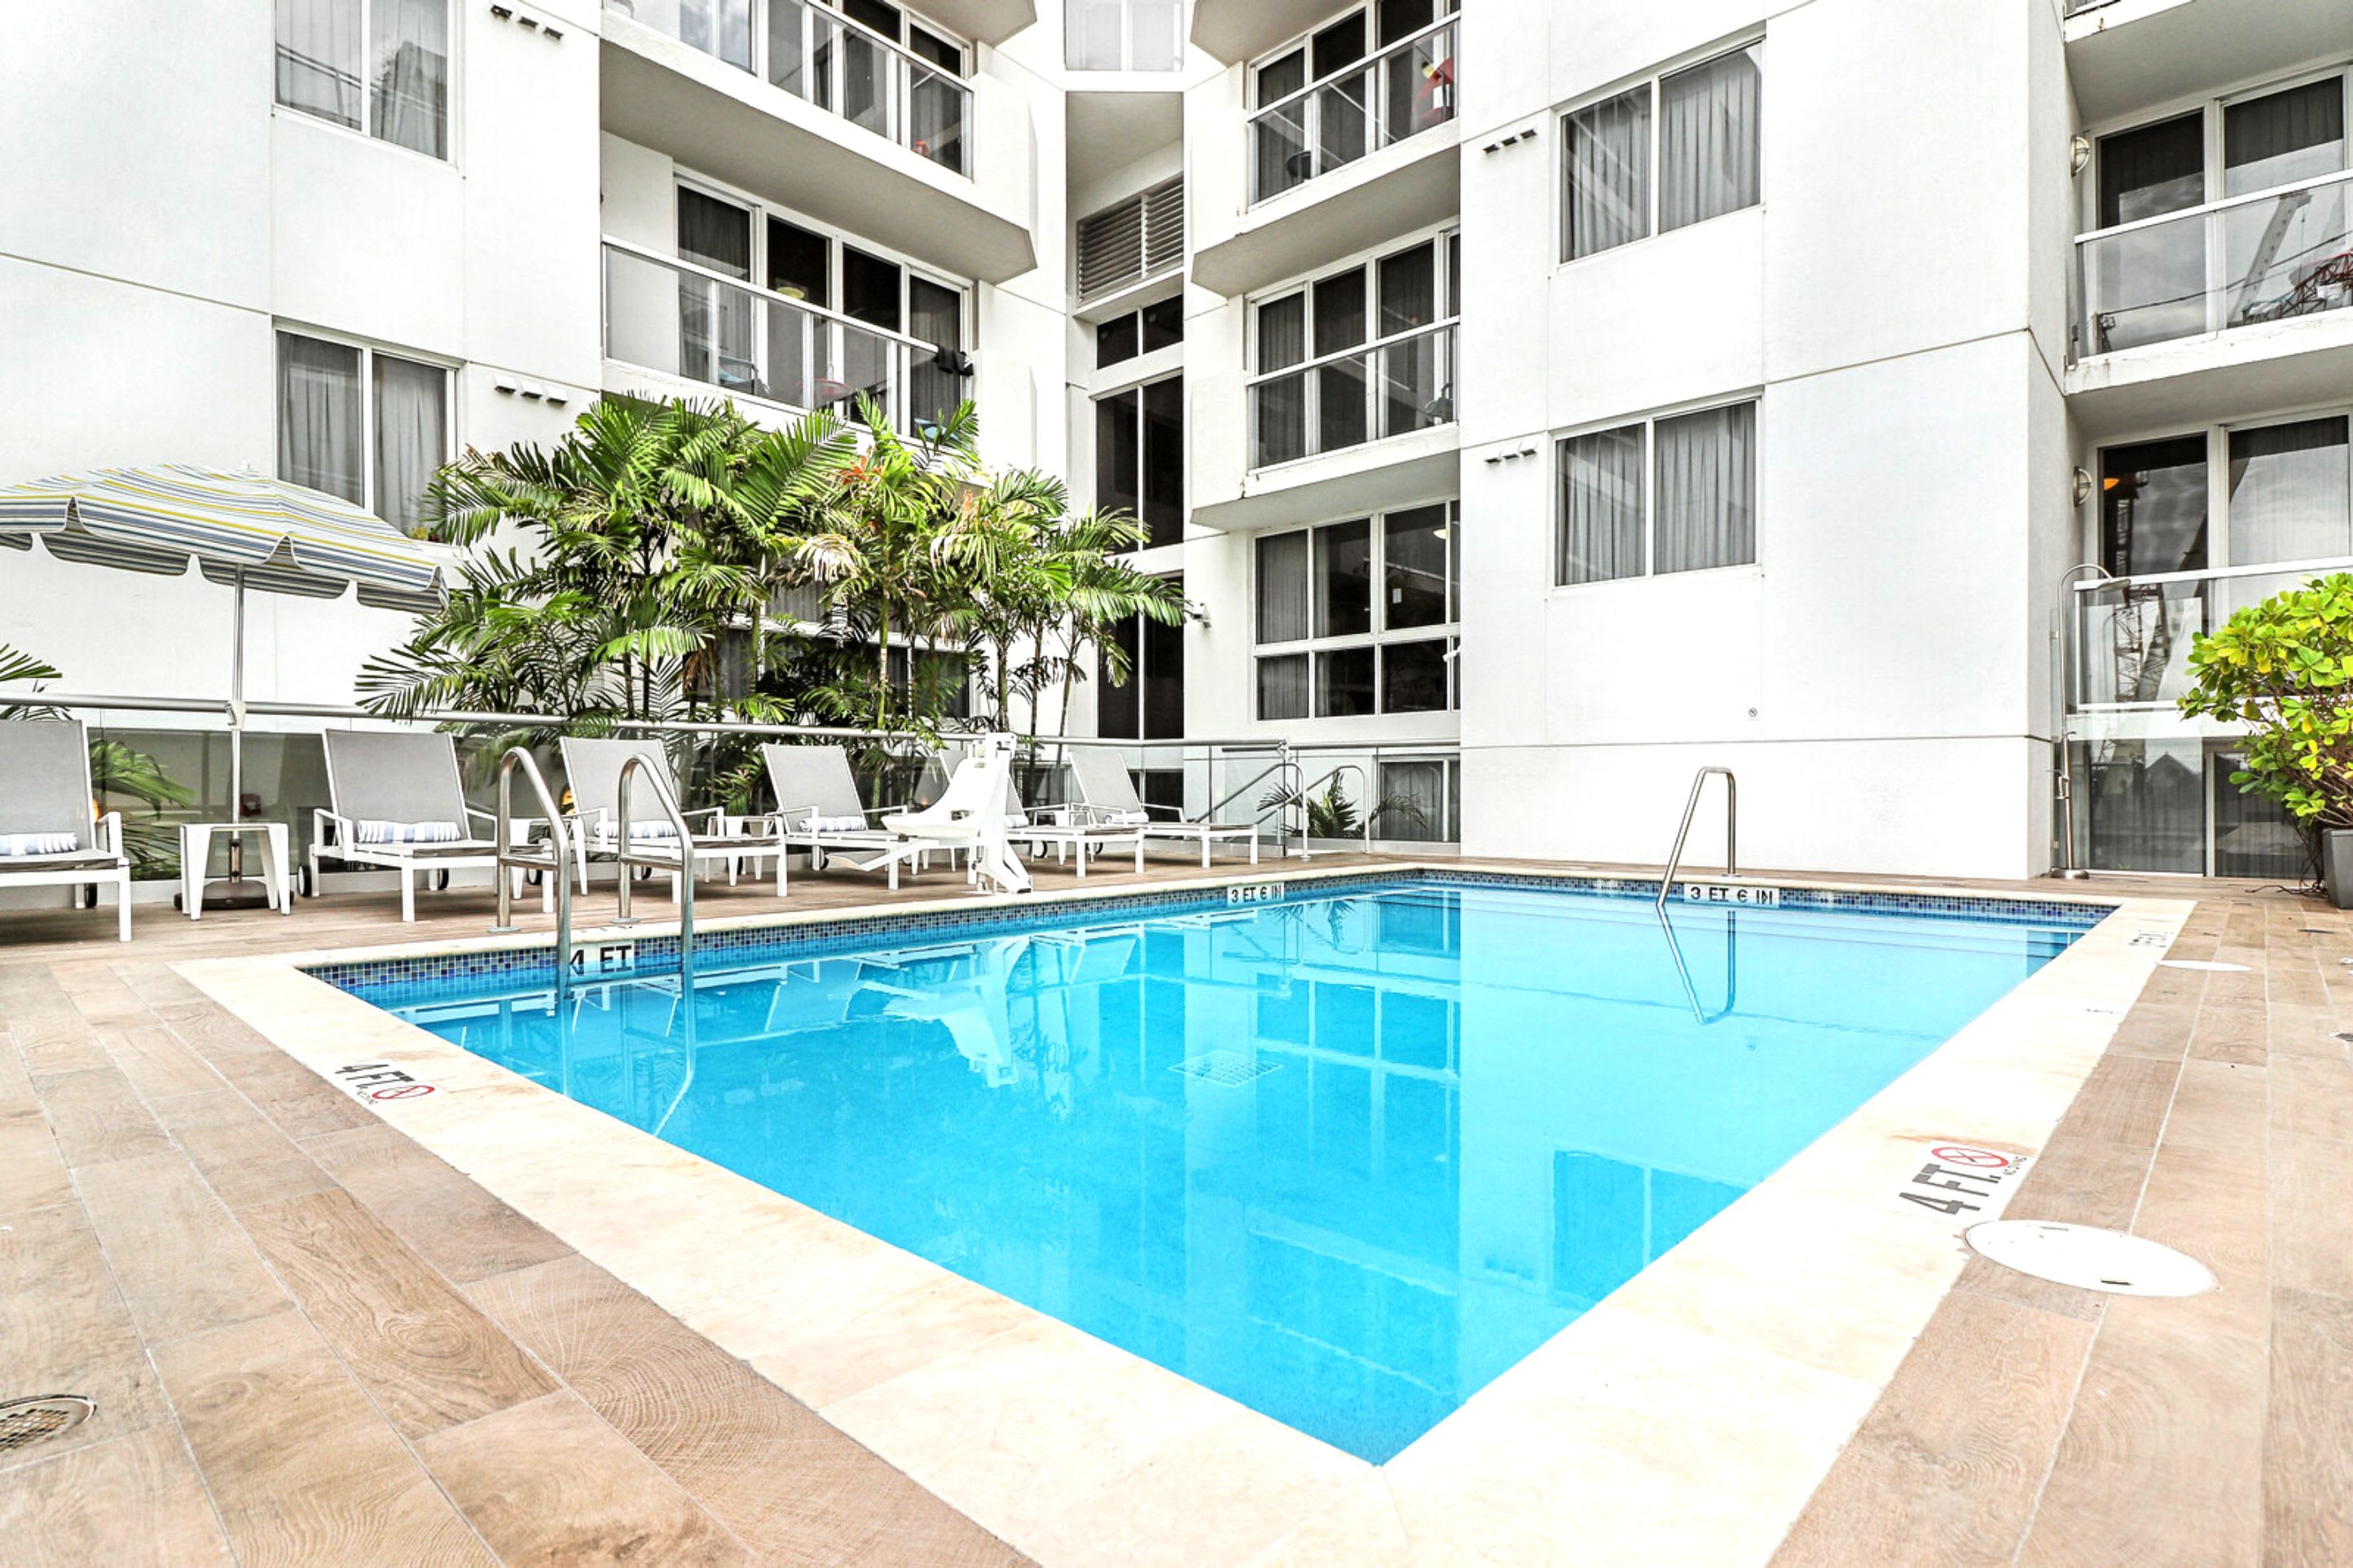 Property Image 2 - Habitat Brickell | 10 mins to South Beach | Gym + Pool | Balcony | Chic 2 Bed